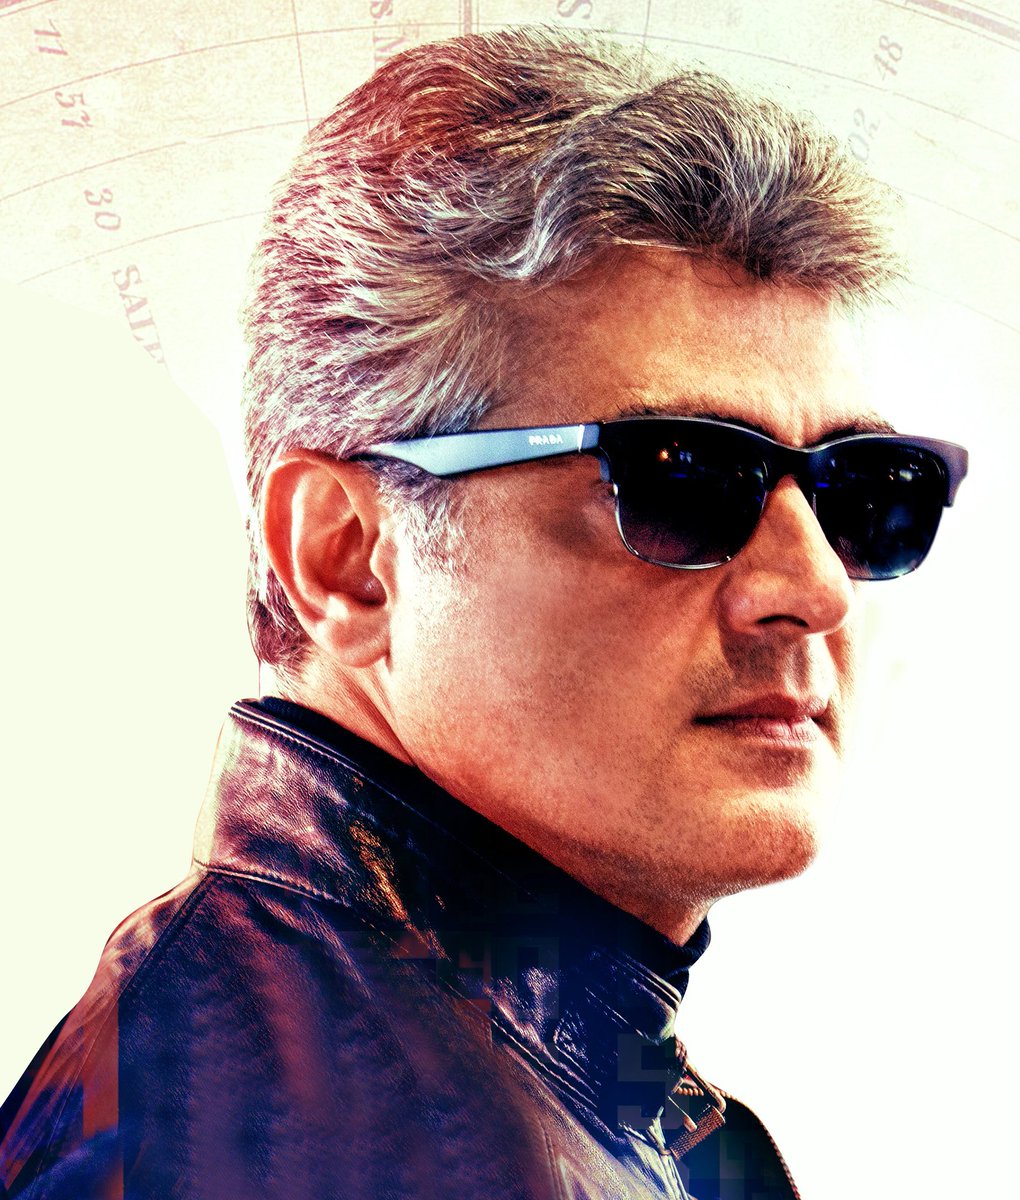 What are some unknown facts about ajith Kumar (actor)? - Quora